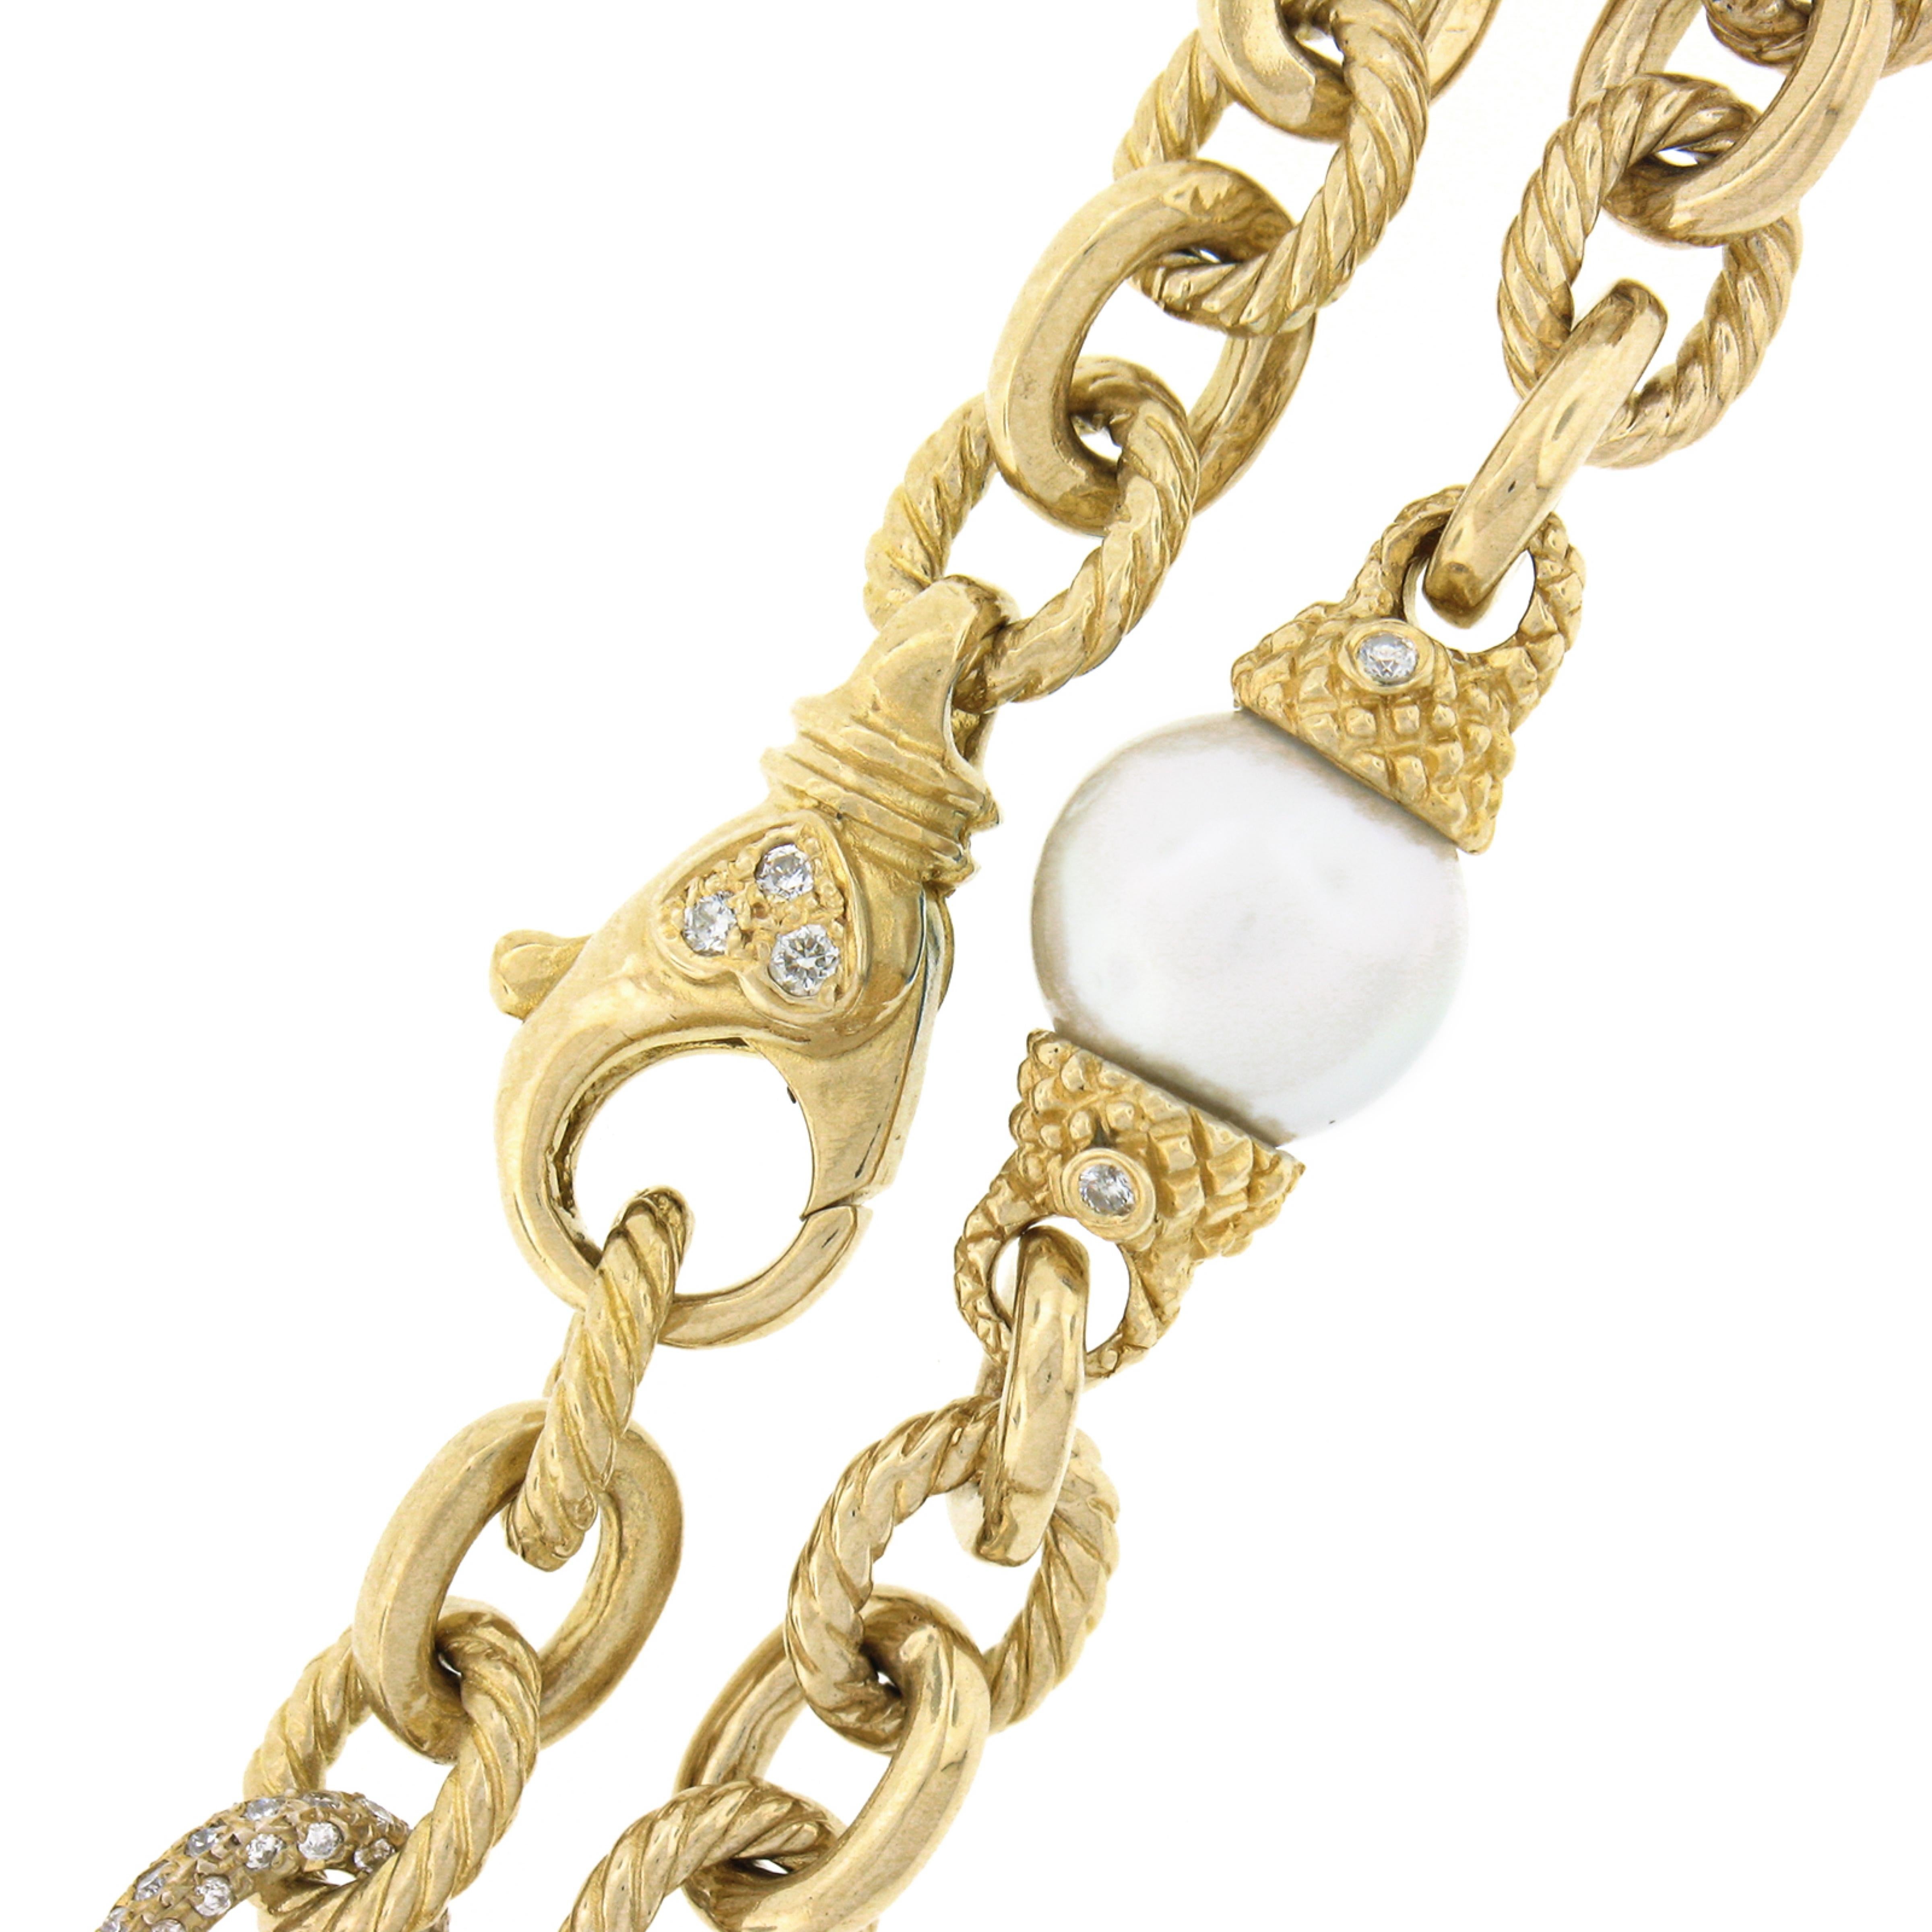 Fancy 14K Gold Cable & Polished Link W/ Pearl & Diamond Chain Necklace For Sale 2